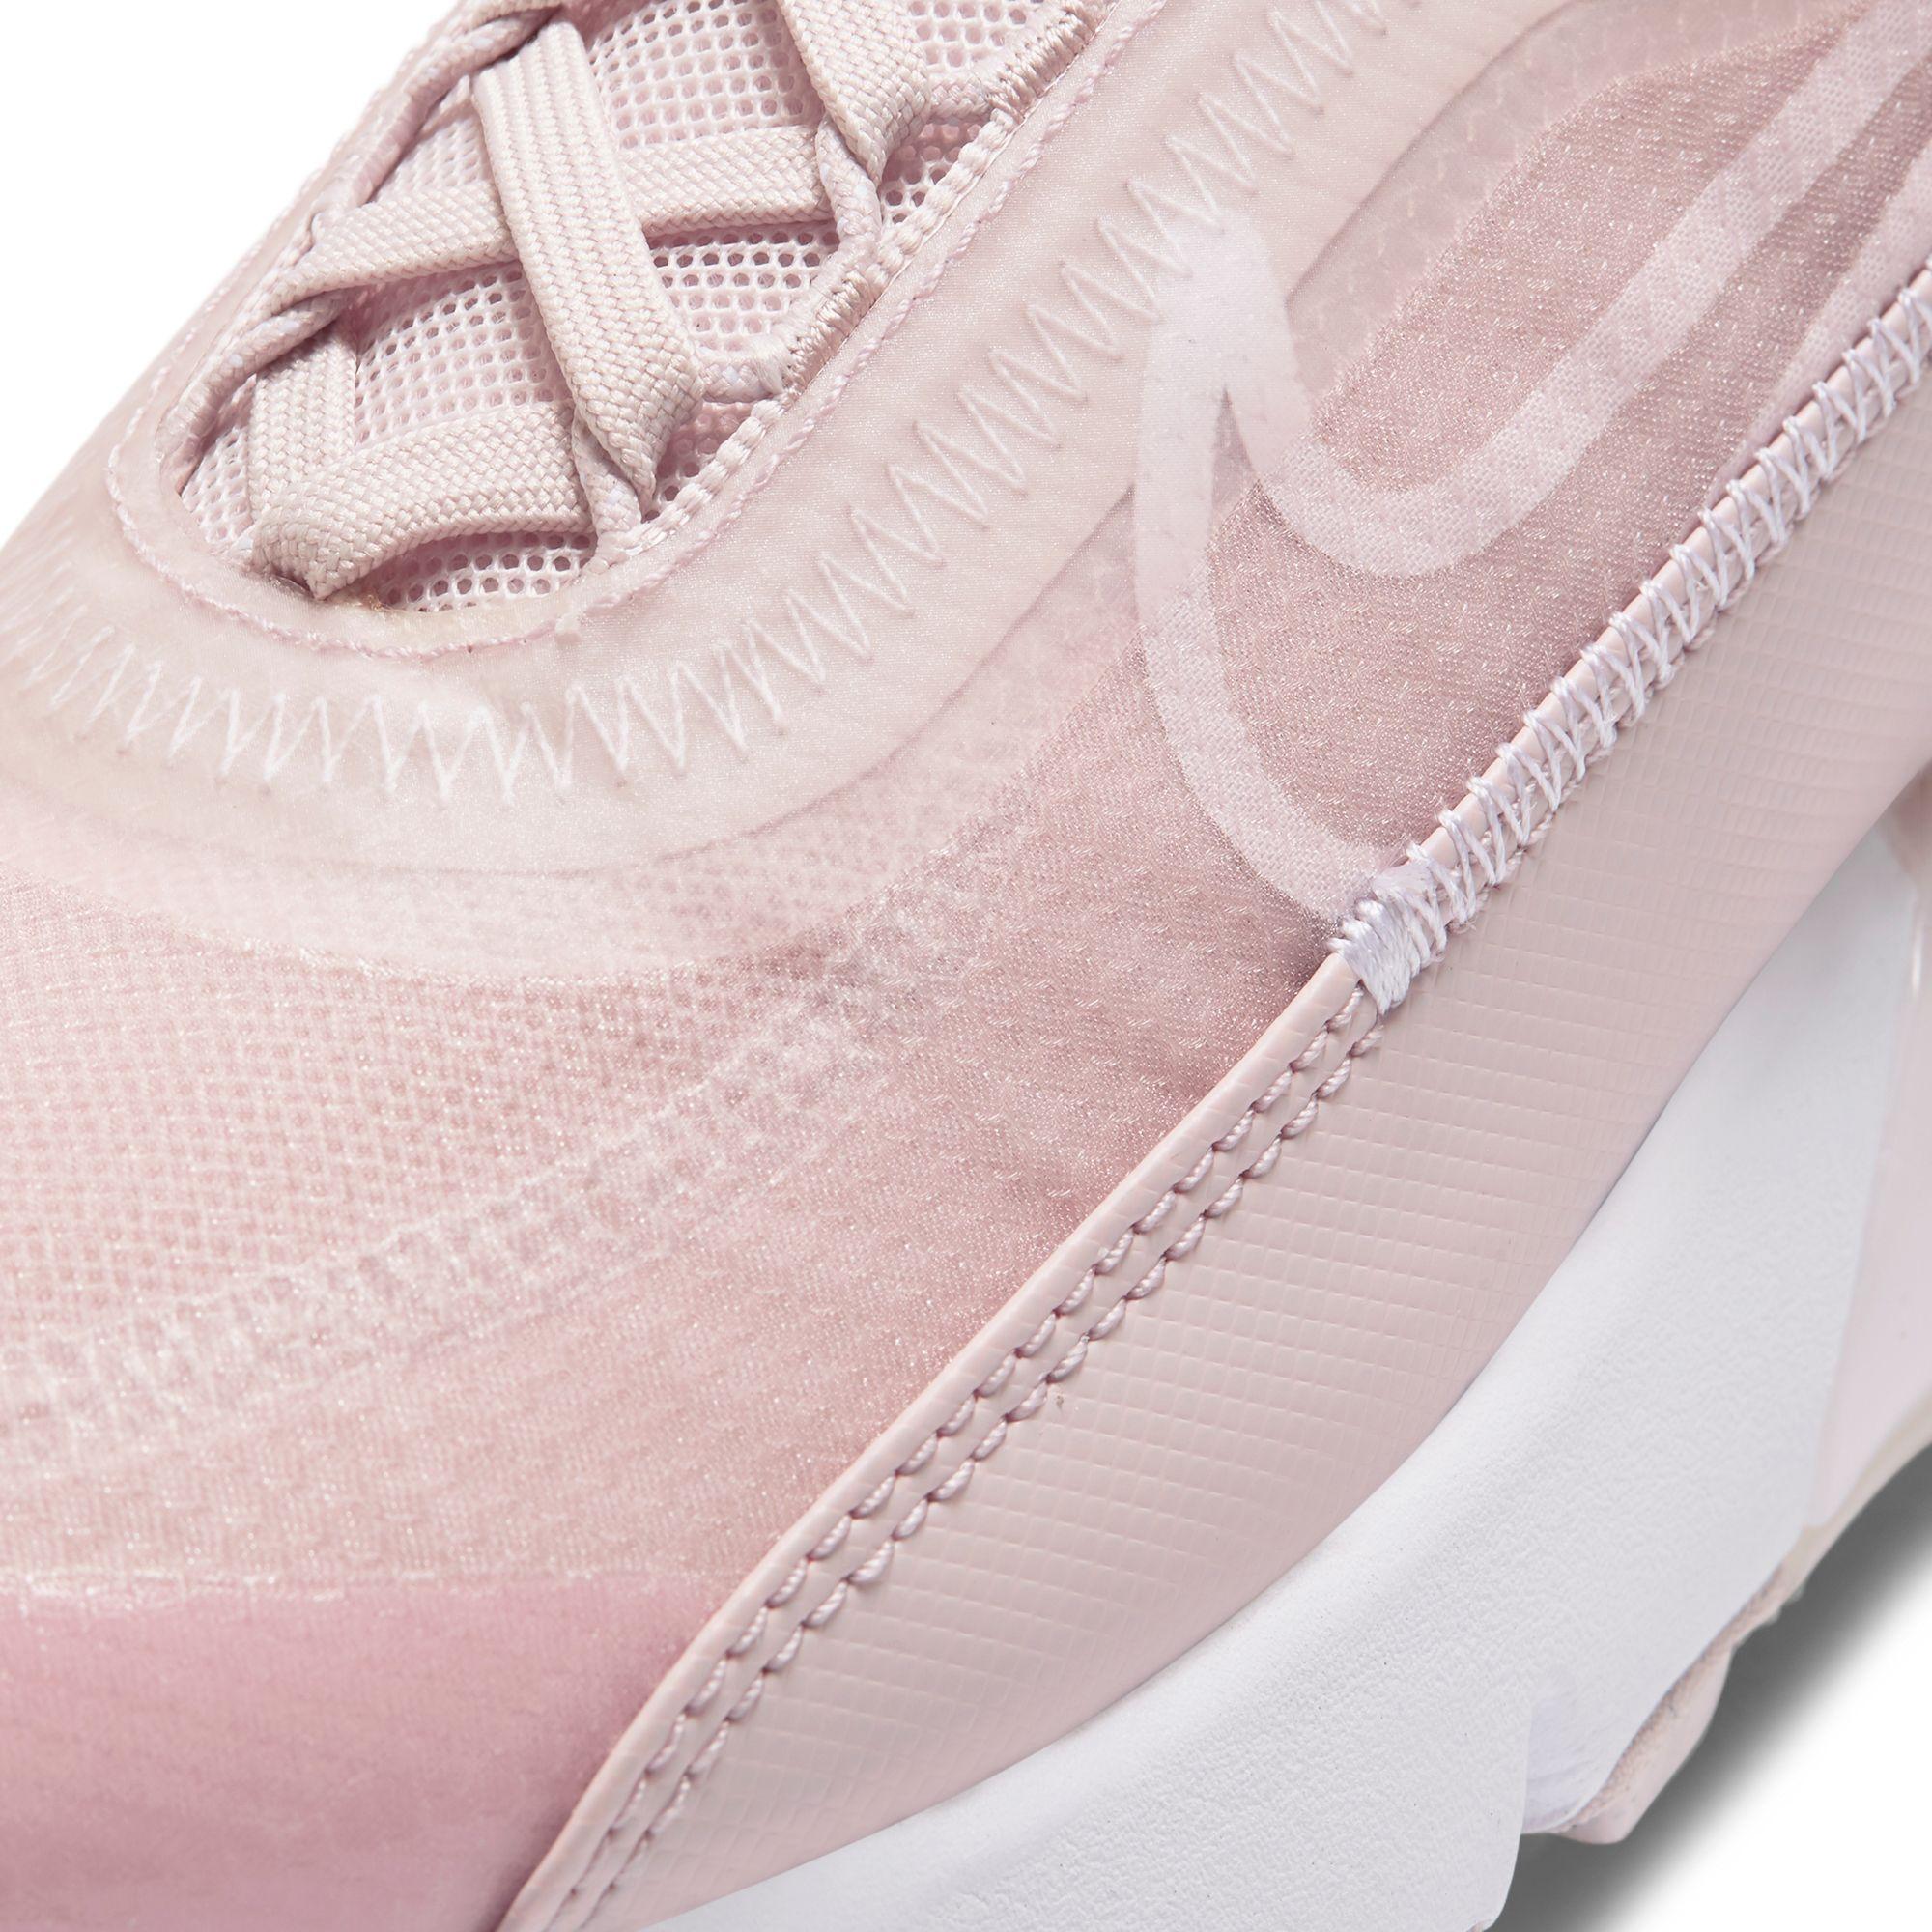 Nike Synthetic Air Max 2090 in Pink | Lyst